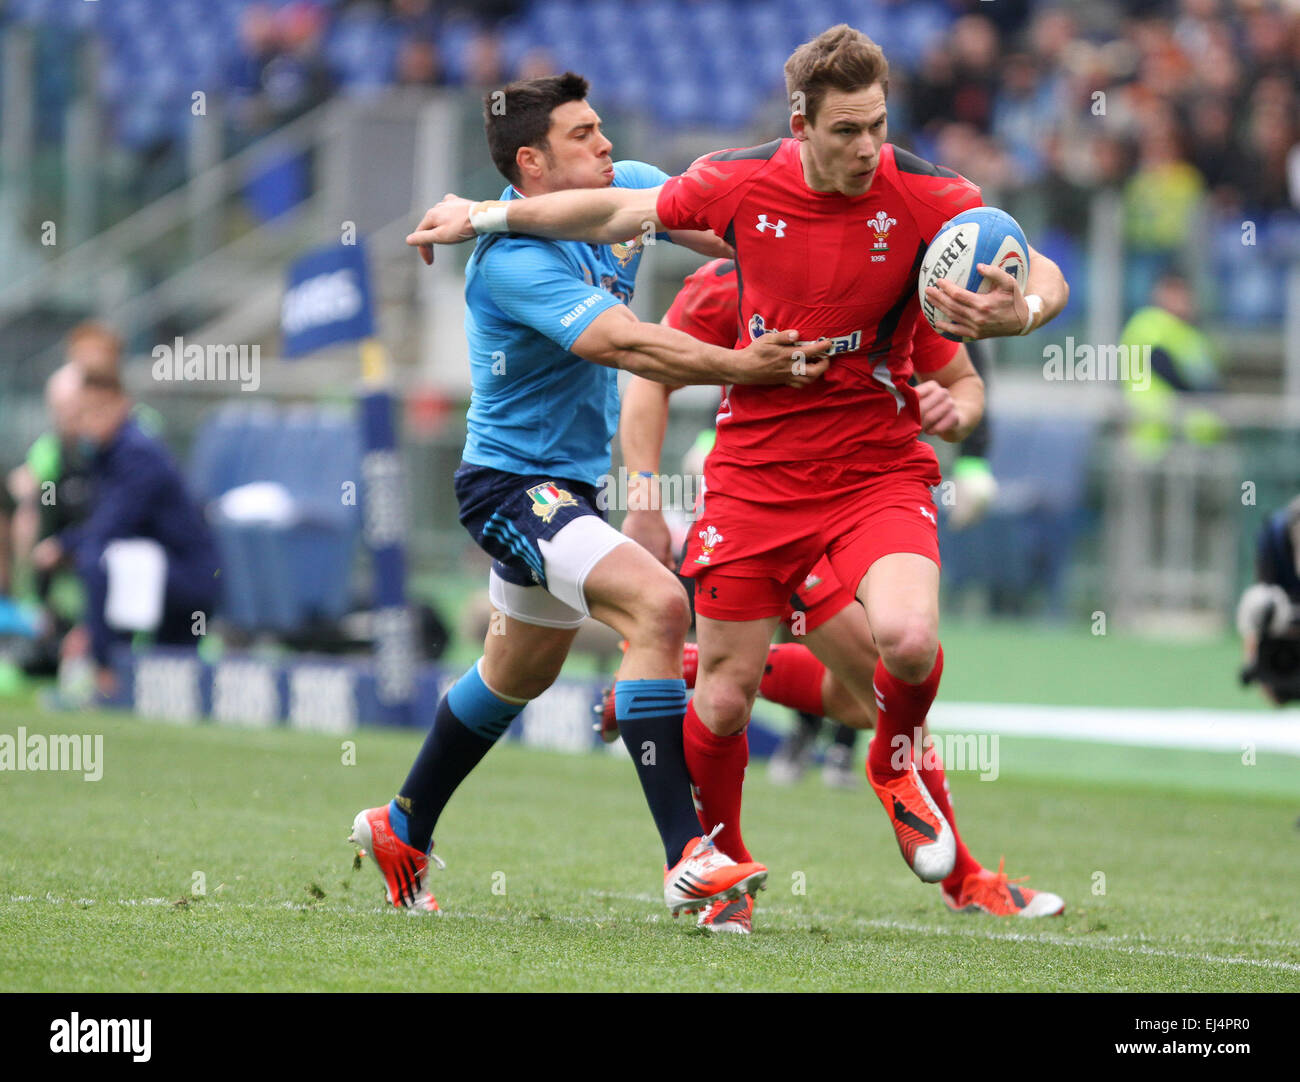 Rome, Italy. 21st March, 2015. Wales player Liam Williams fights for the bal with Edoardo Gori (Italy) during the Six Nations international rugby union match between Italy and Wales on March 21, 2015 at the Olympic Stadium in Rome. Credit:  Andrea Spinelli/Alamy Live News Stock Photo